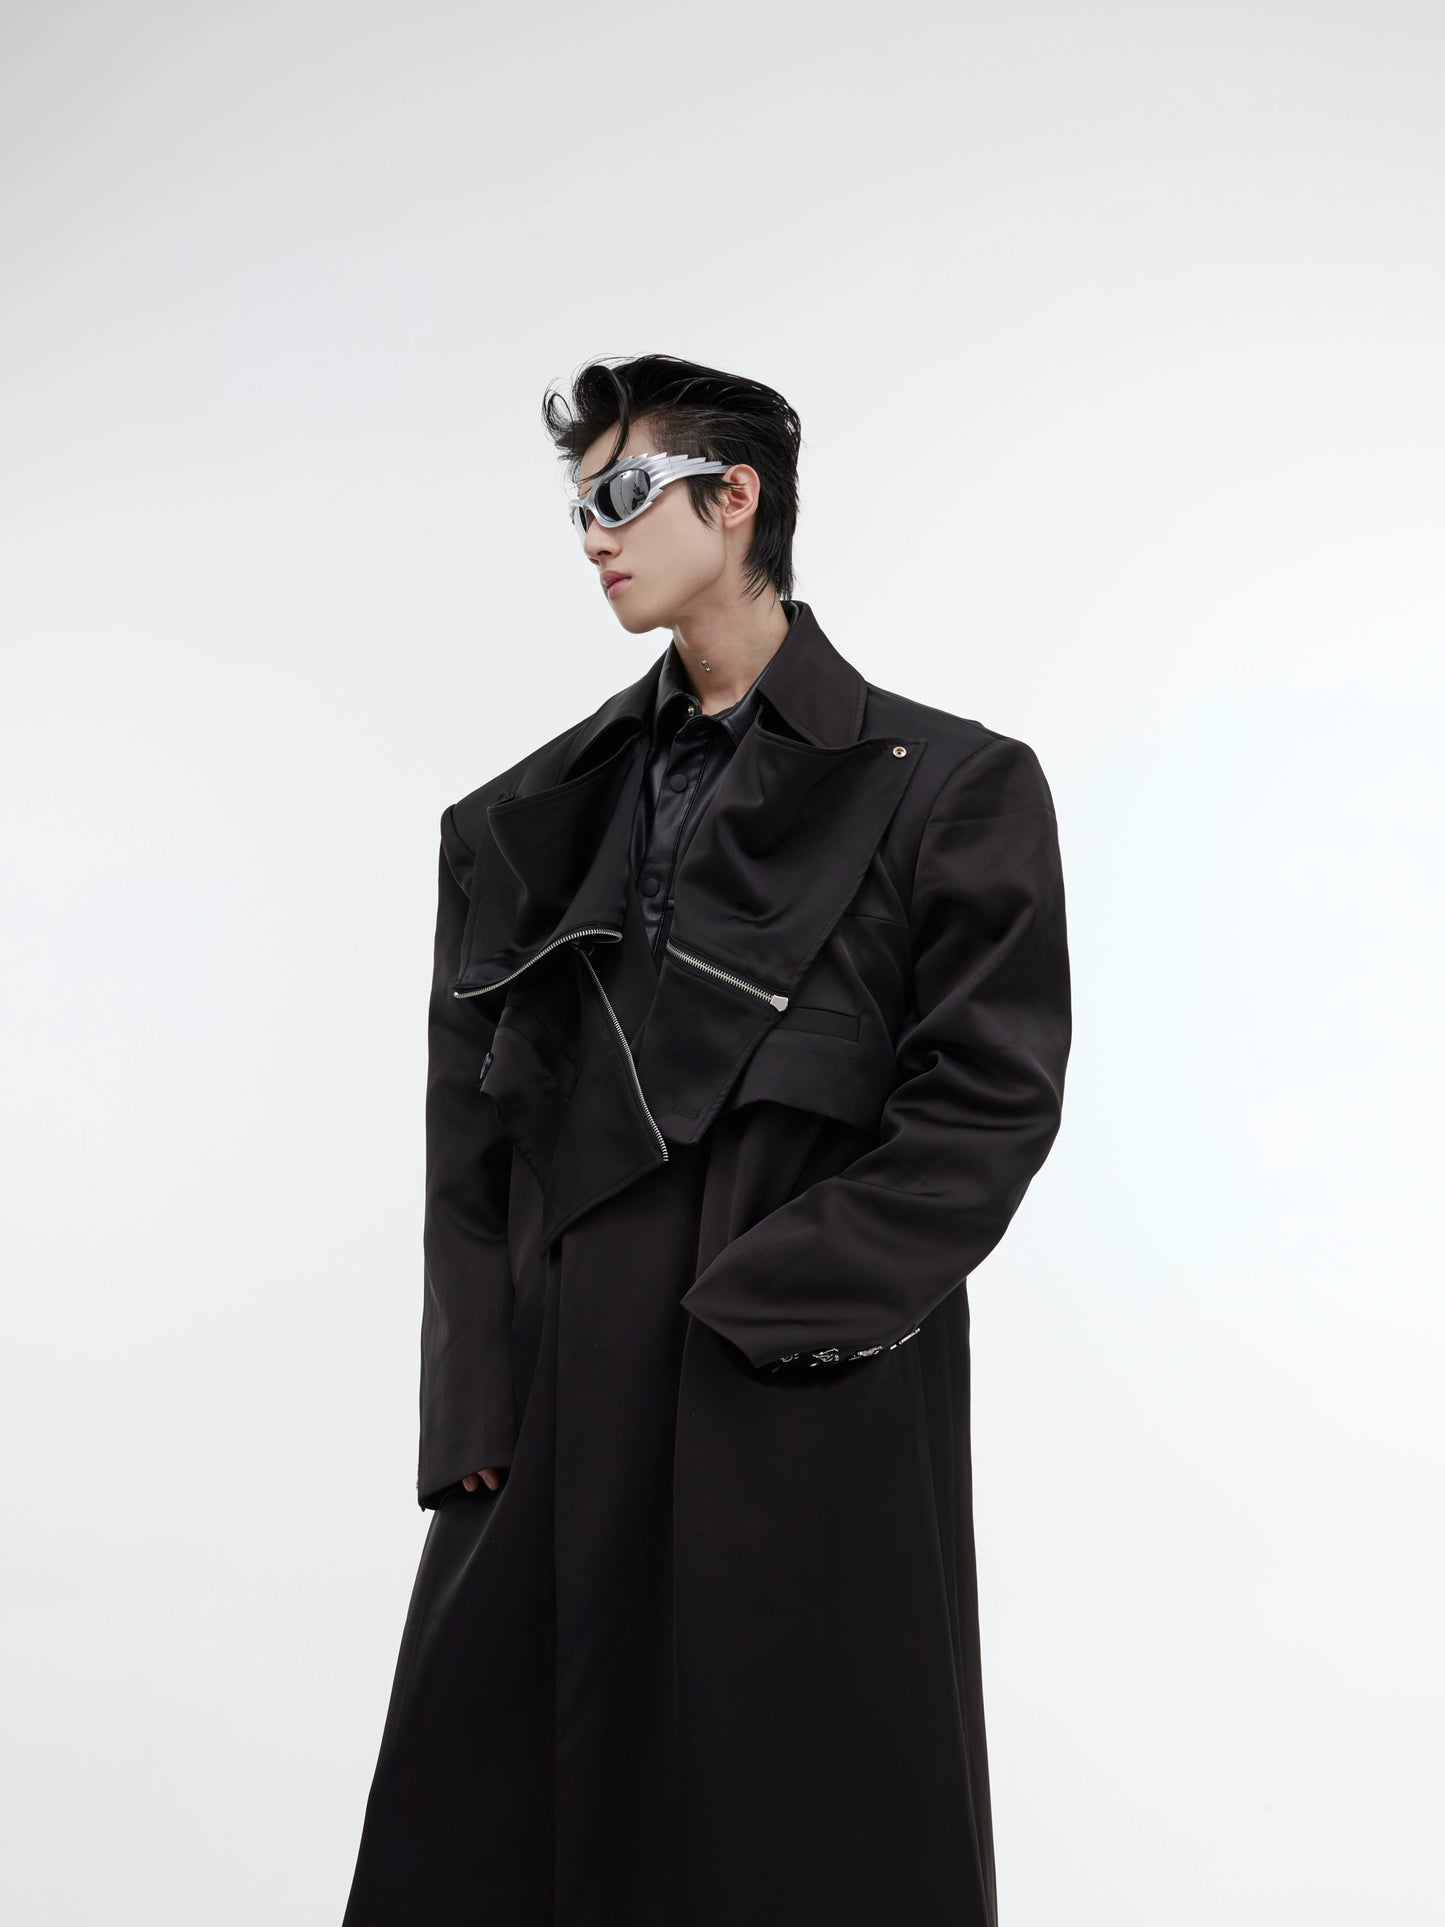 CulturE niche three-dimensional double-layered deconstructed padded shoulders long coat suit metallic design over-the-knee trench coat